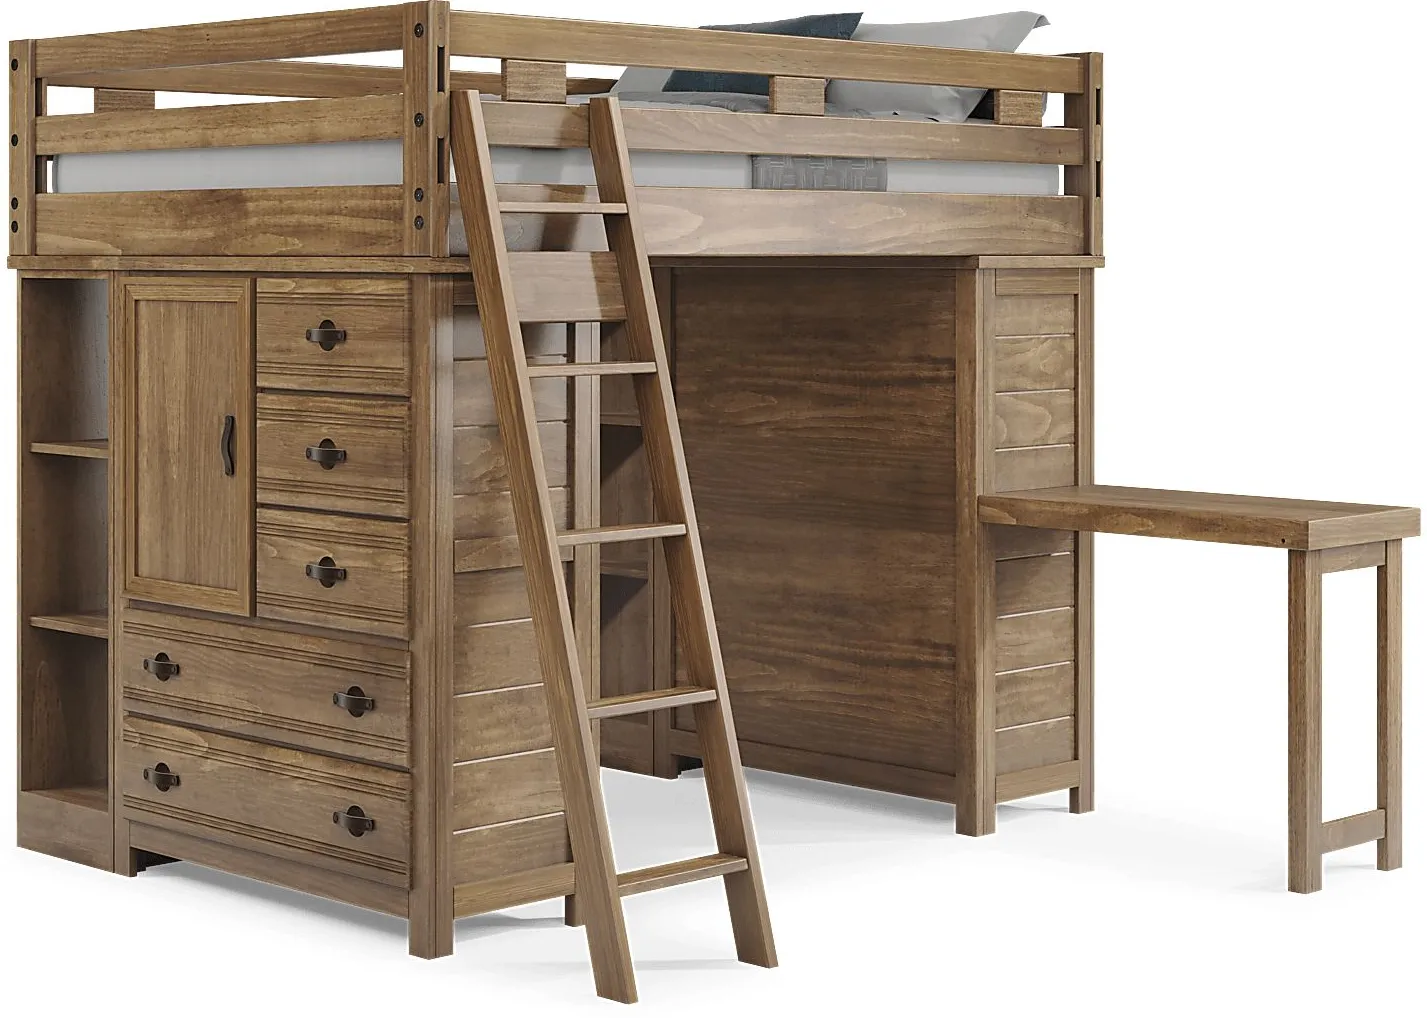 Kids Creekside 2.0 Chestnut Full Loft with 2 Loft Chests, 2 Bookcases and Desk Attachment